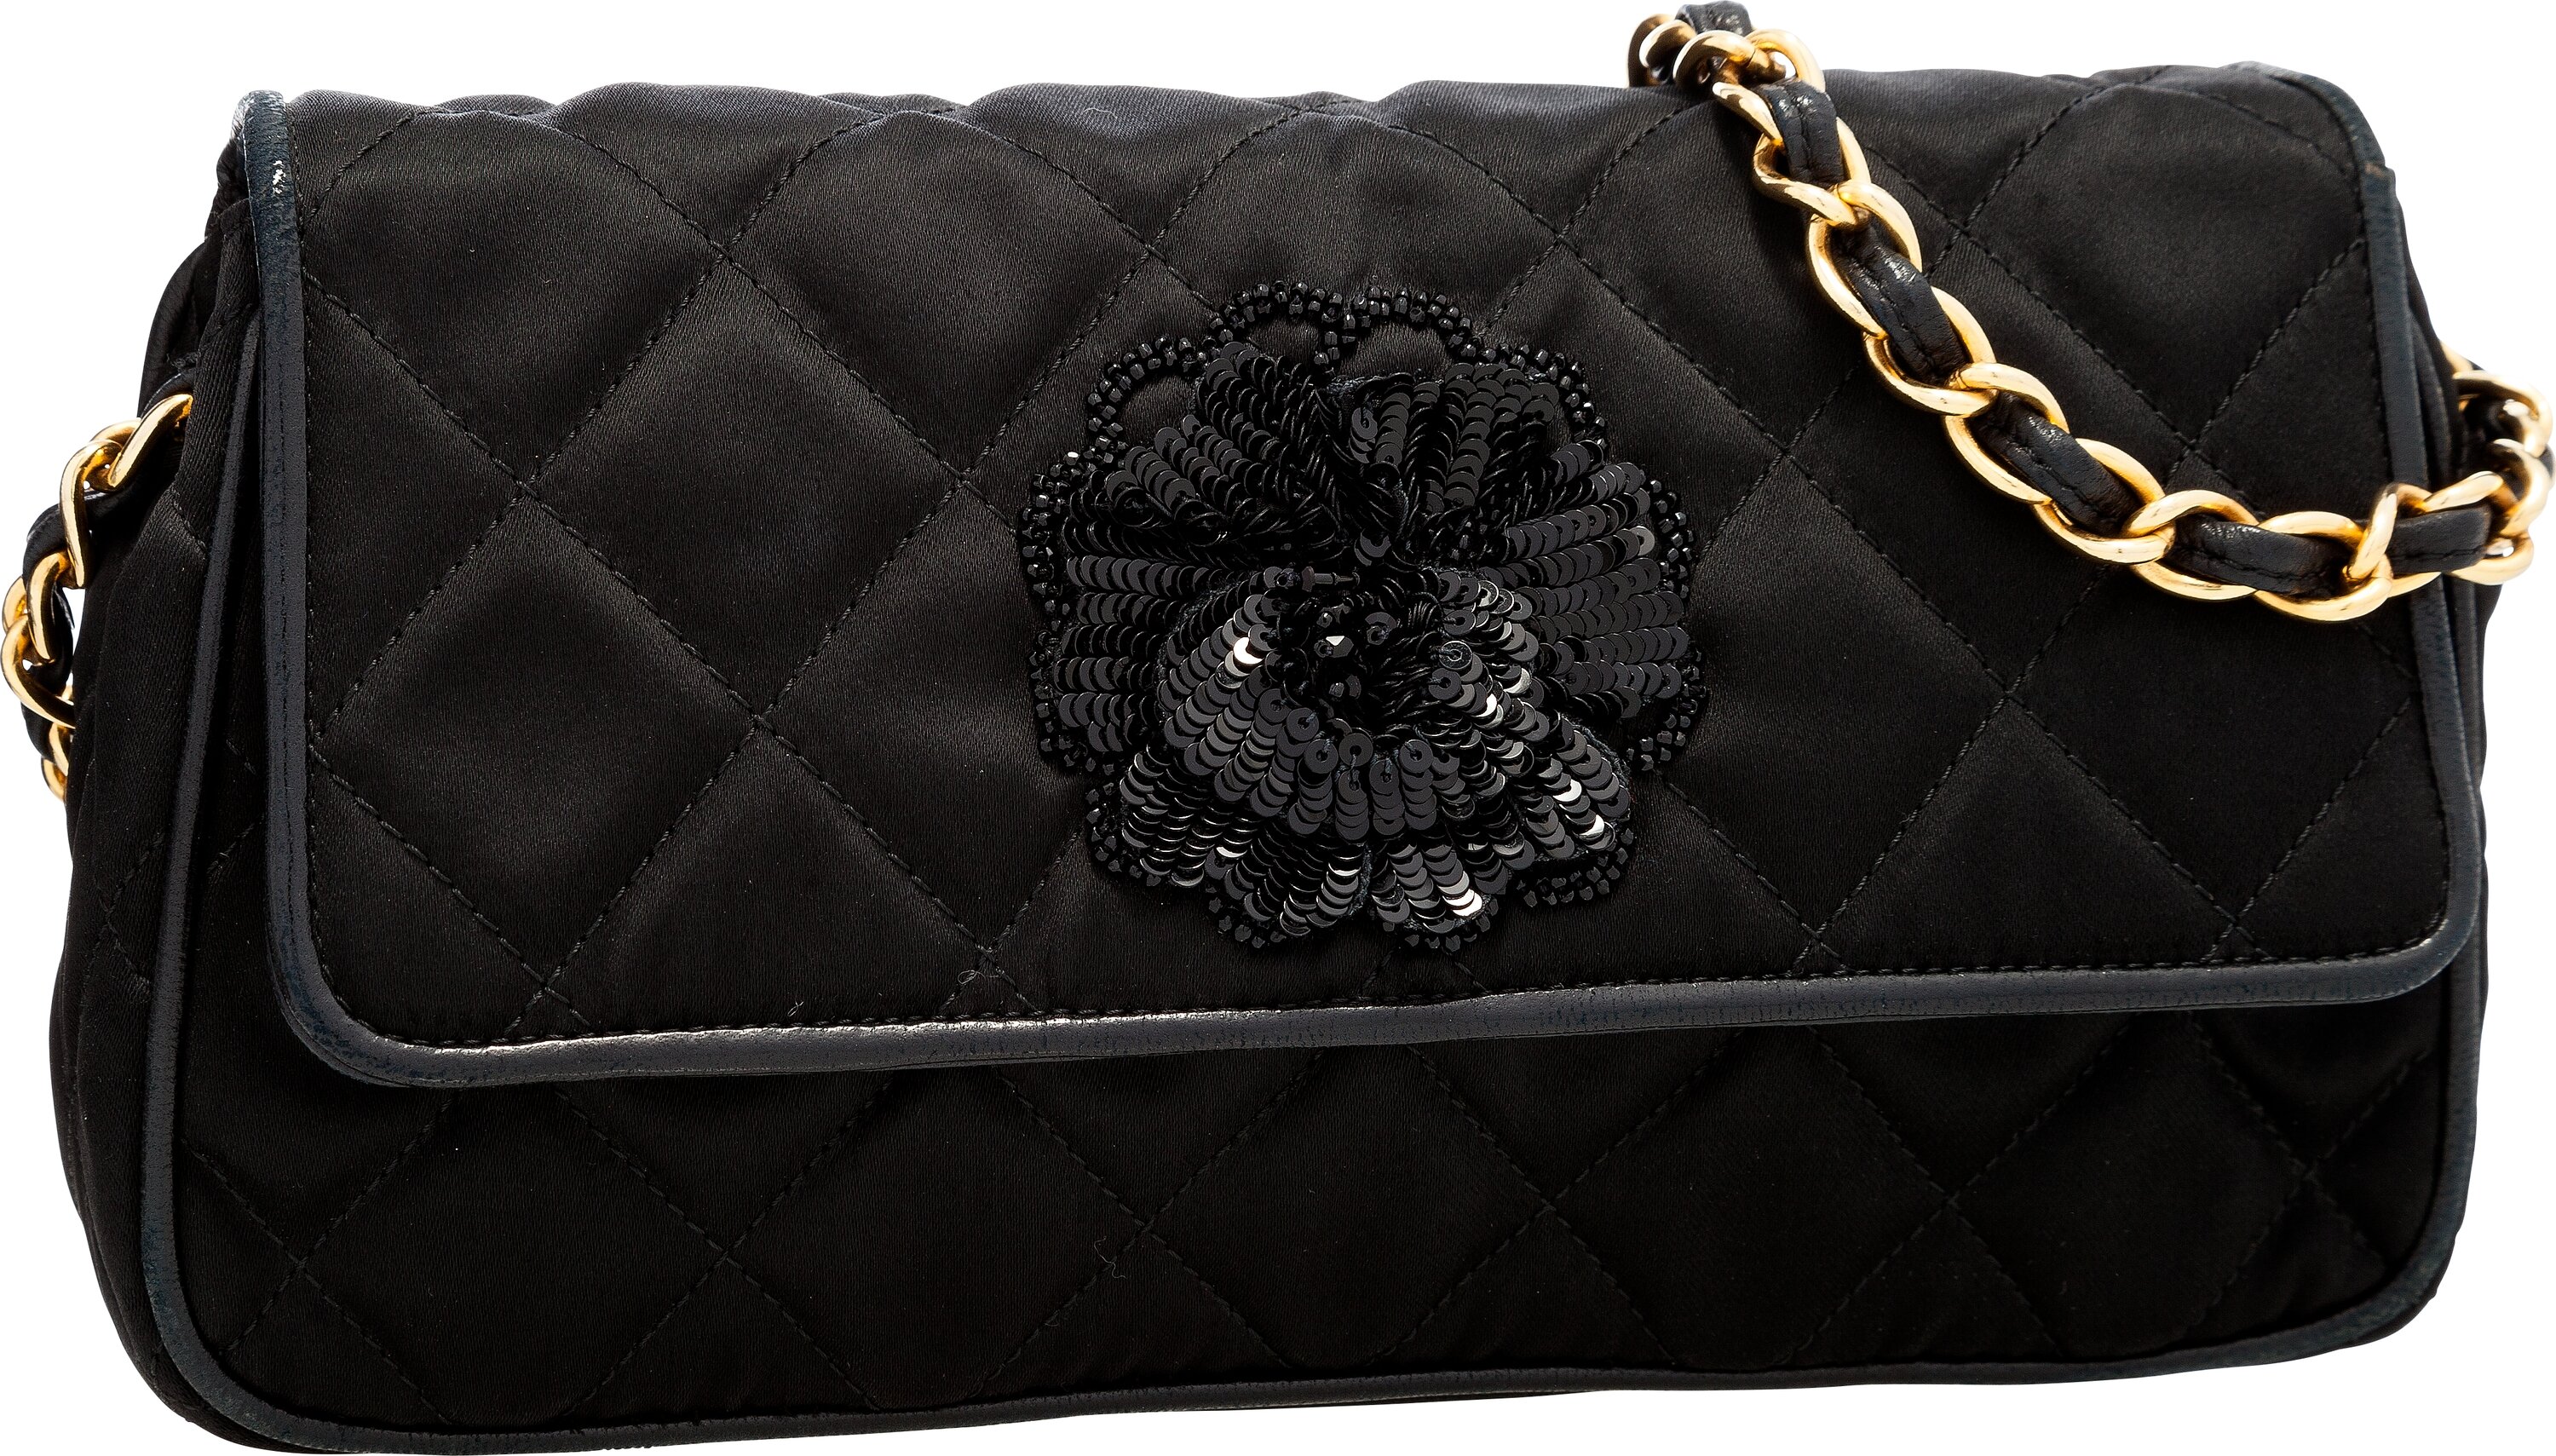 Chanel Black Quilted Satin Evening Bag with Sequin Camellia Flower